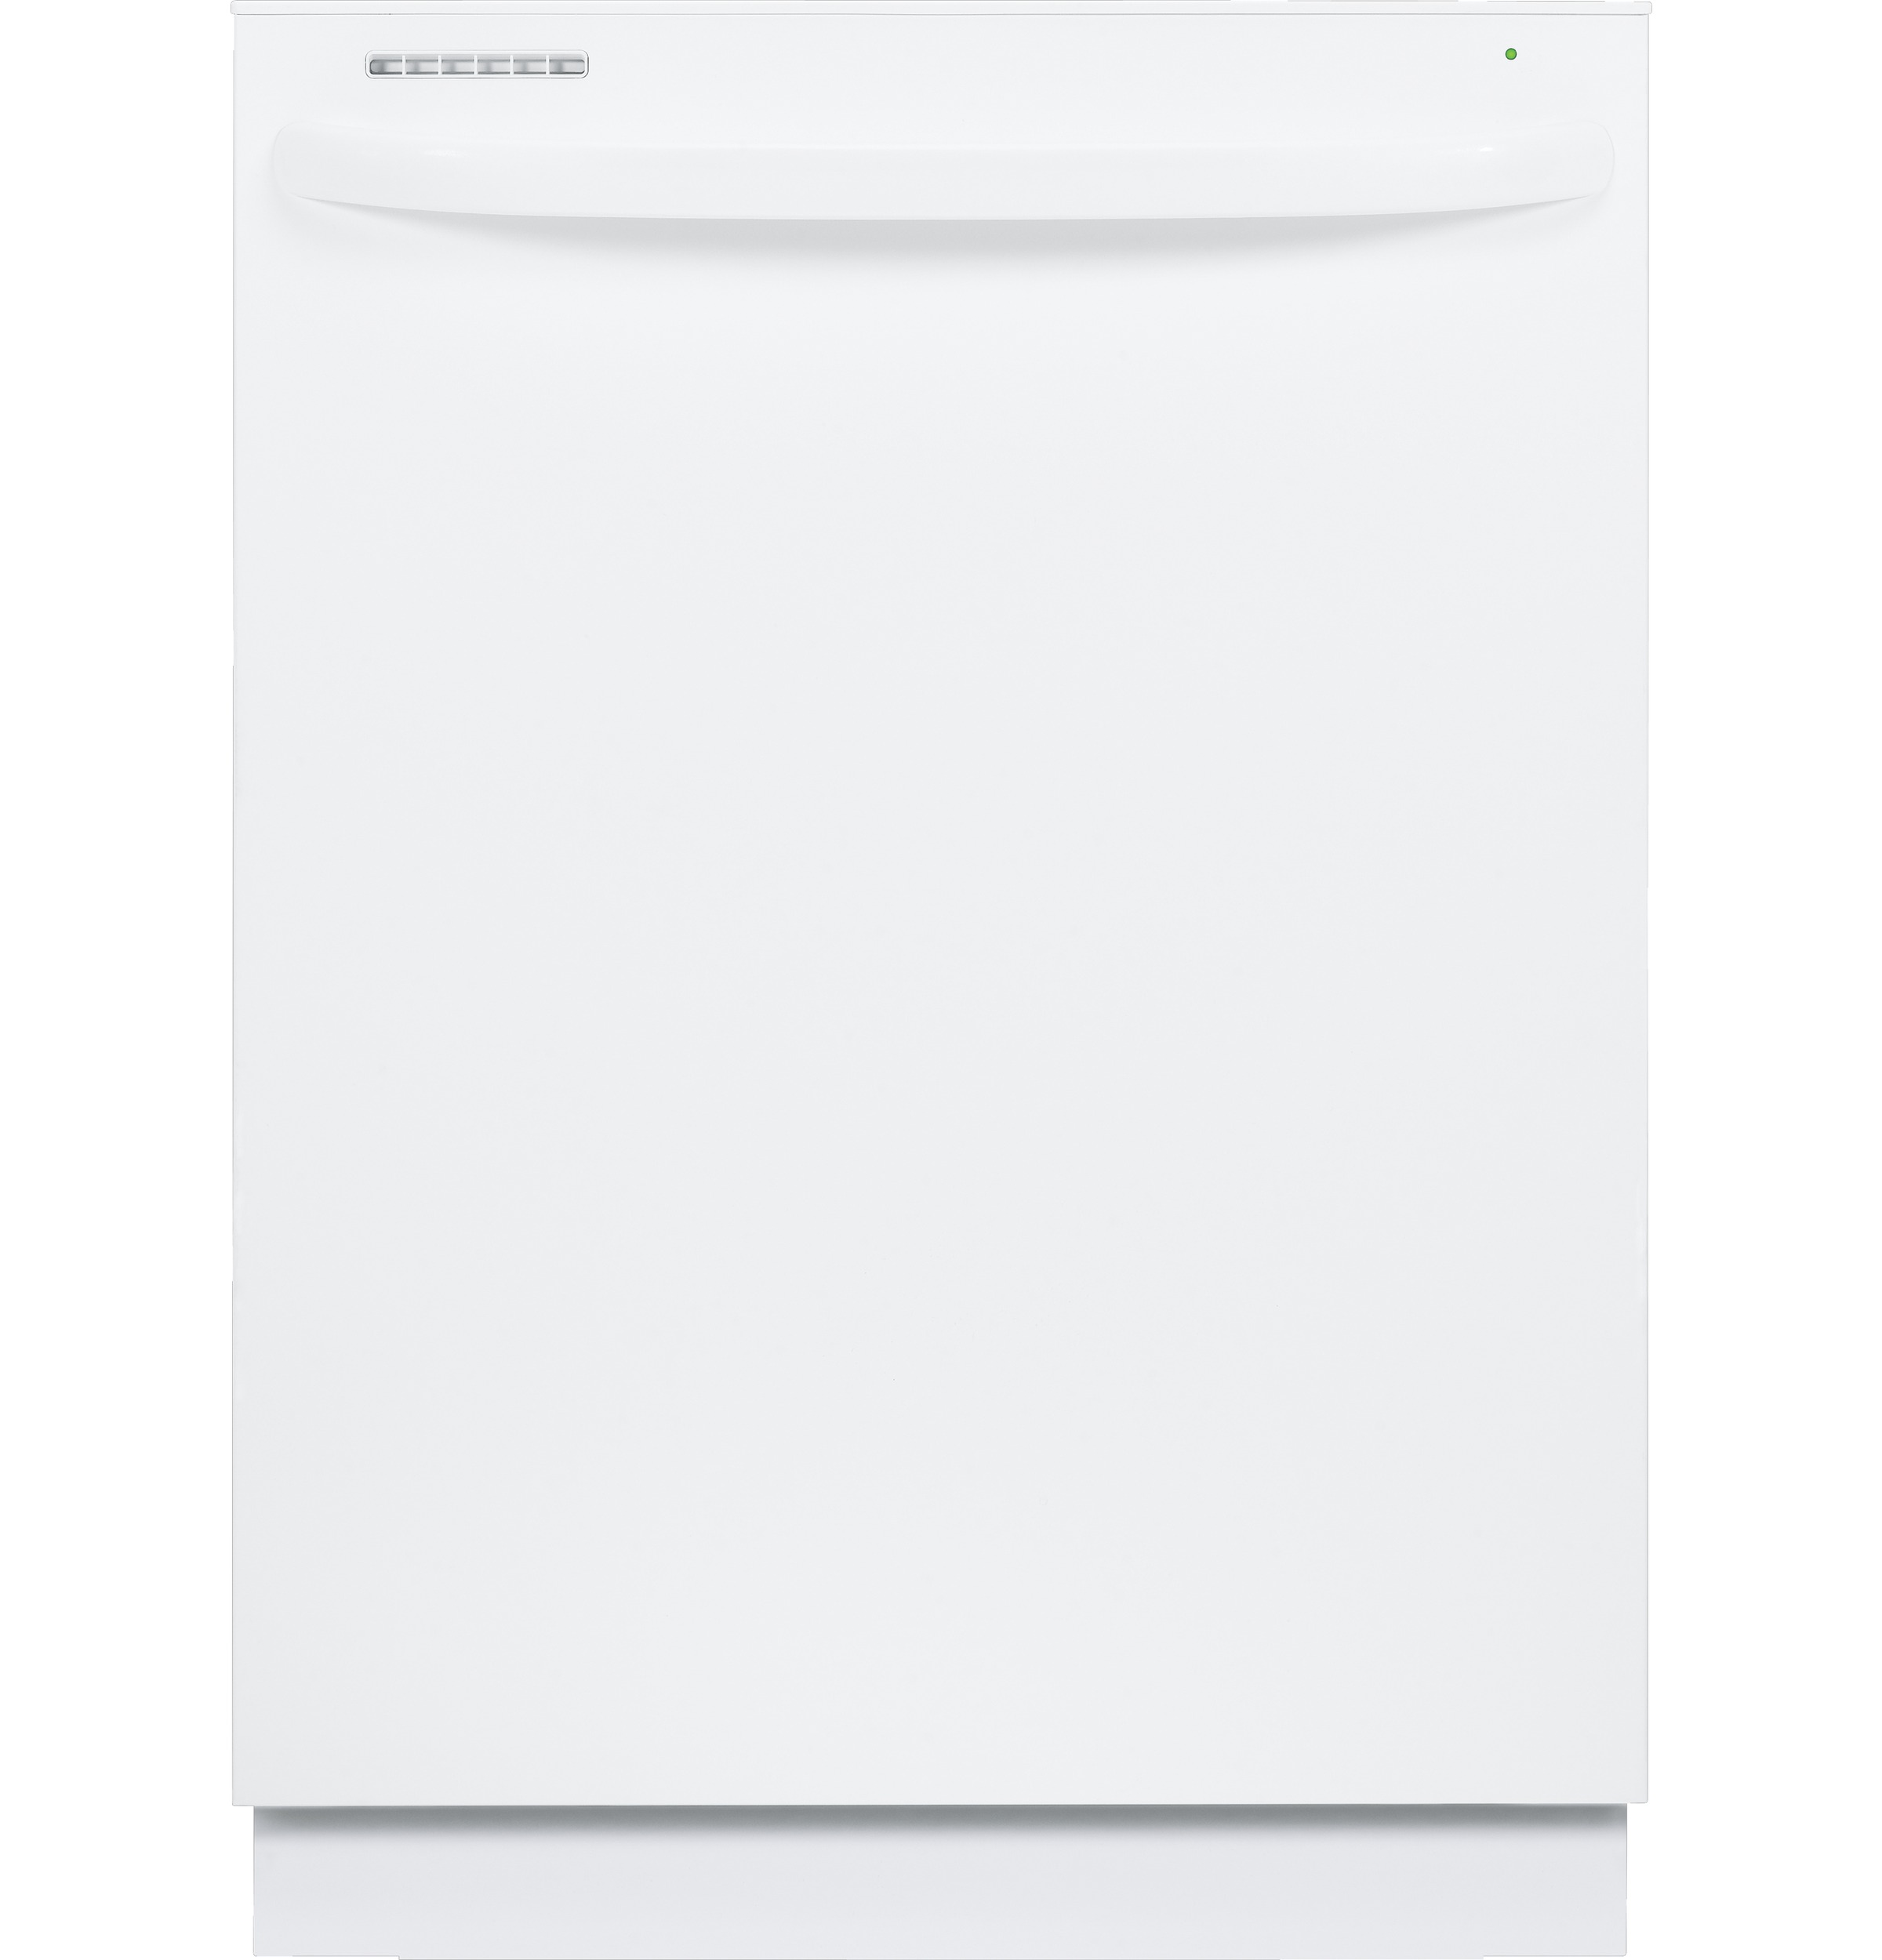 GE® Tall Tub Built-In Dishwasher with hidden controls and auto wash cycle